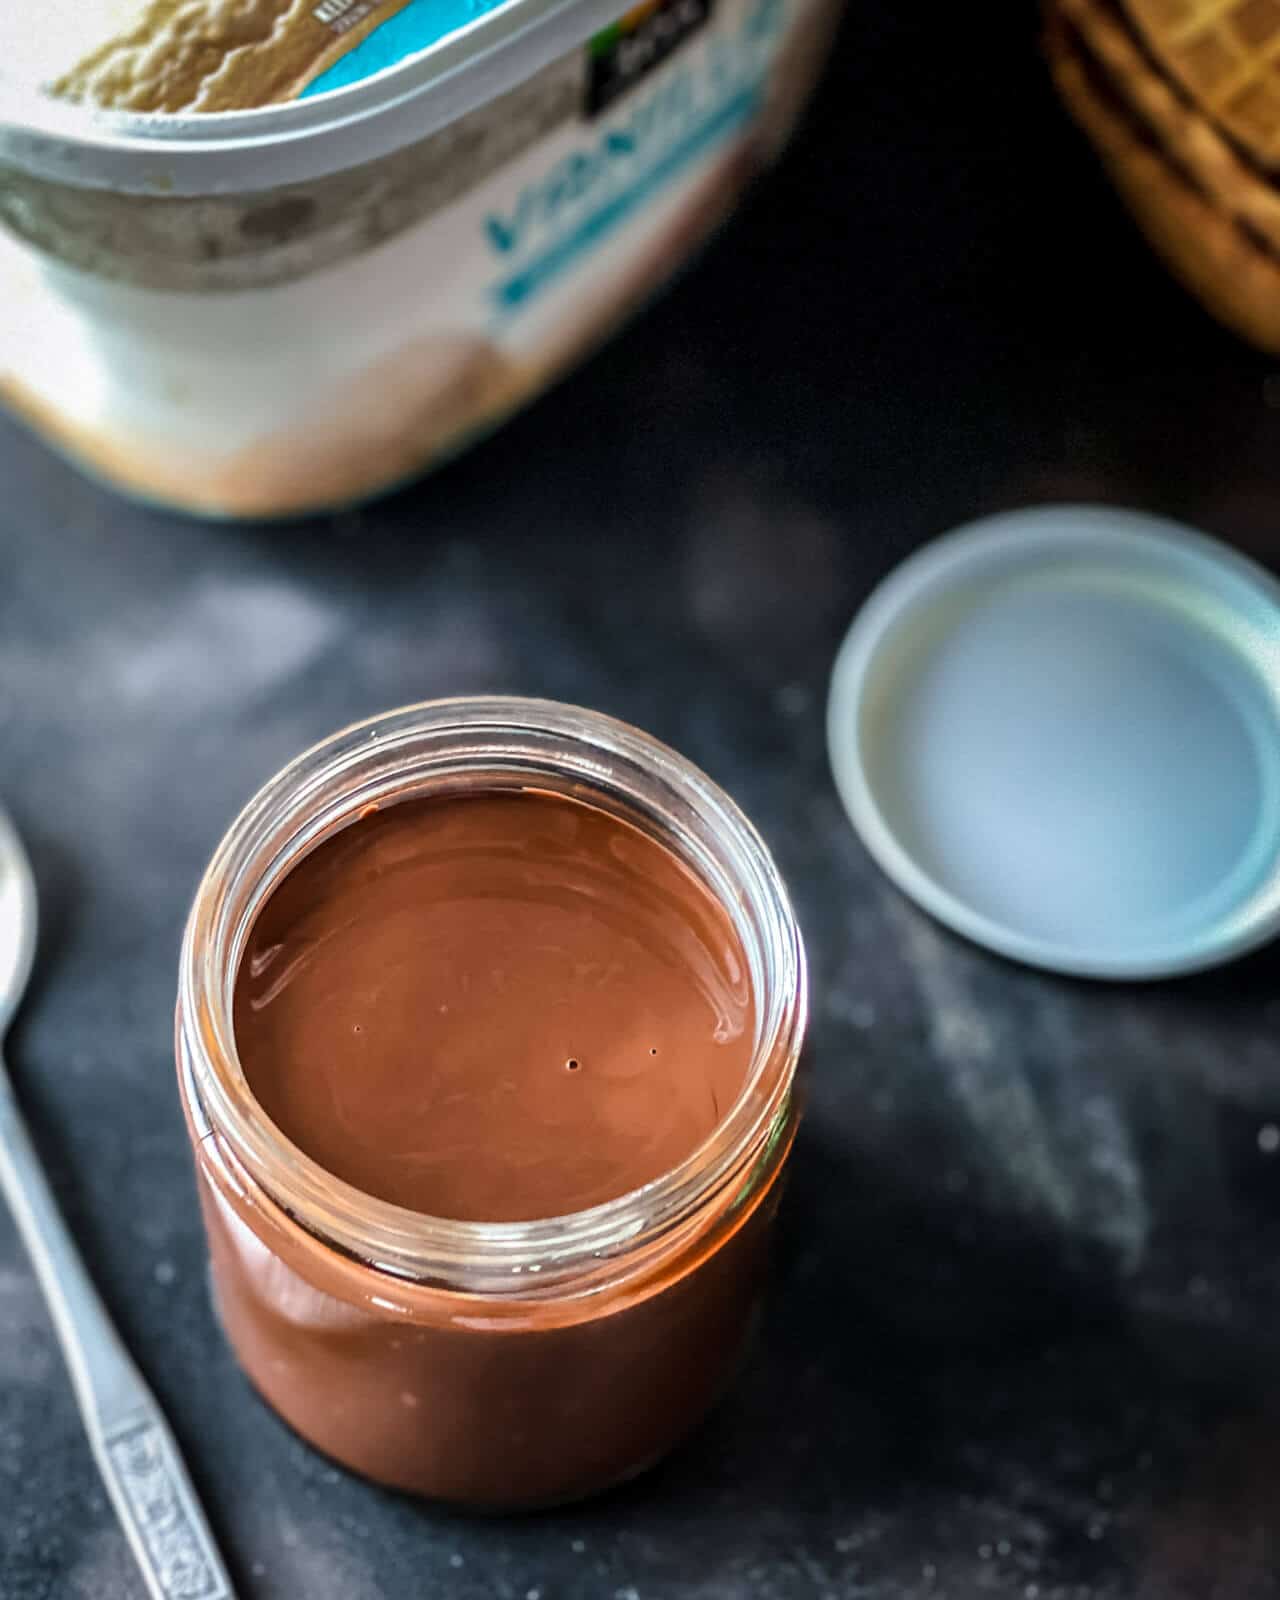 A glass jar of homemade magic shell chocolate sauce with a spoon to the left and a carton of ice cream in the back.